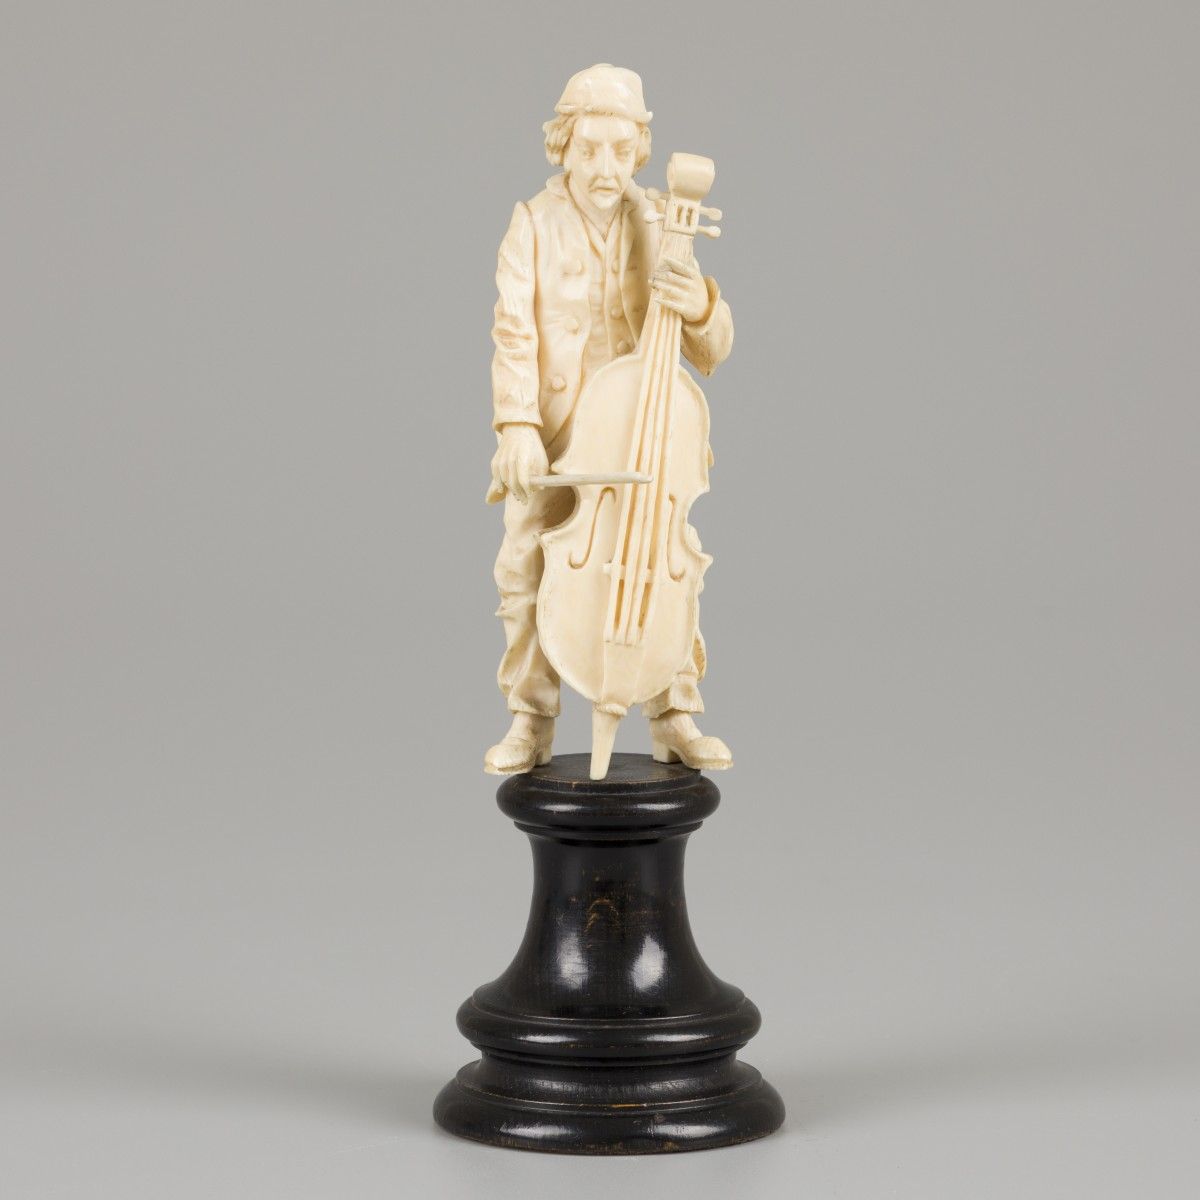 An ivory sculpture of a man with bass, 19th century. Dim. 20 x 5 cm. Estimate: €&hellip;